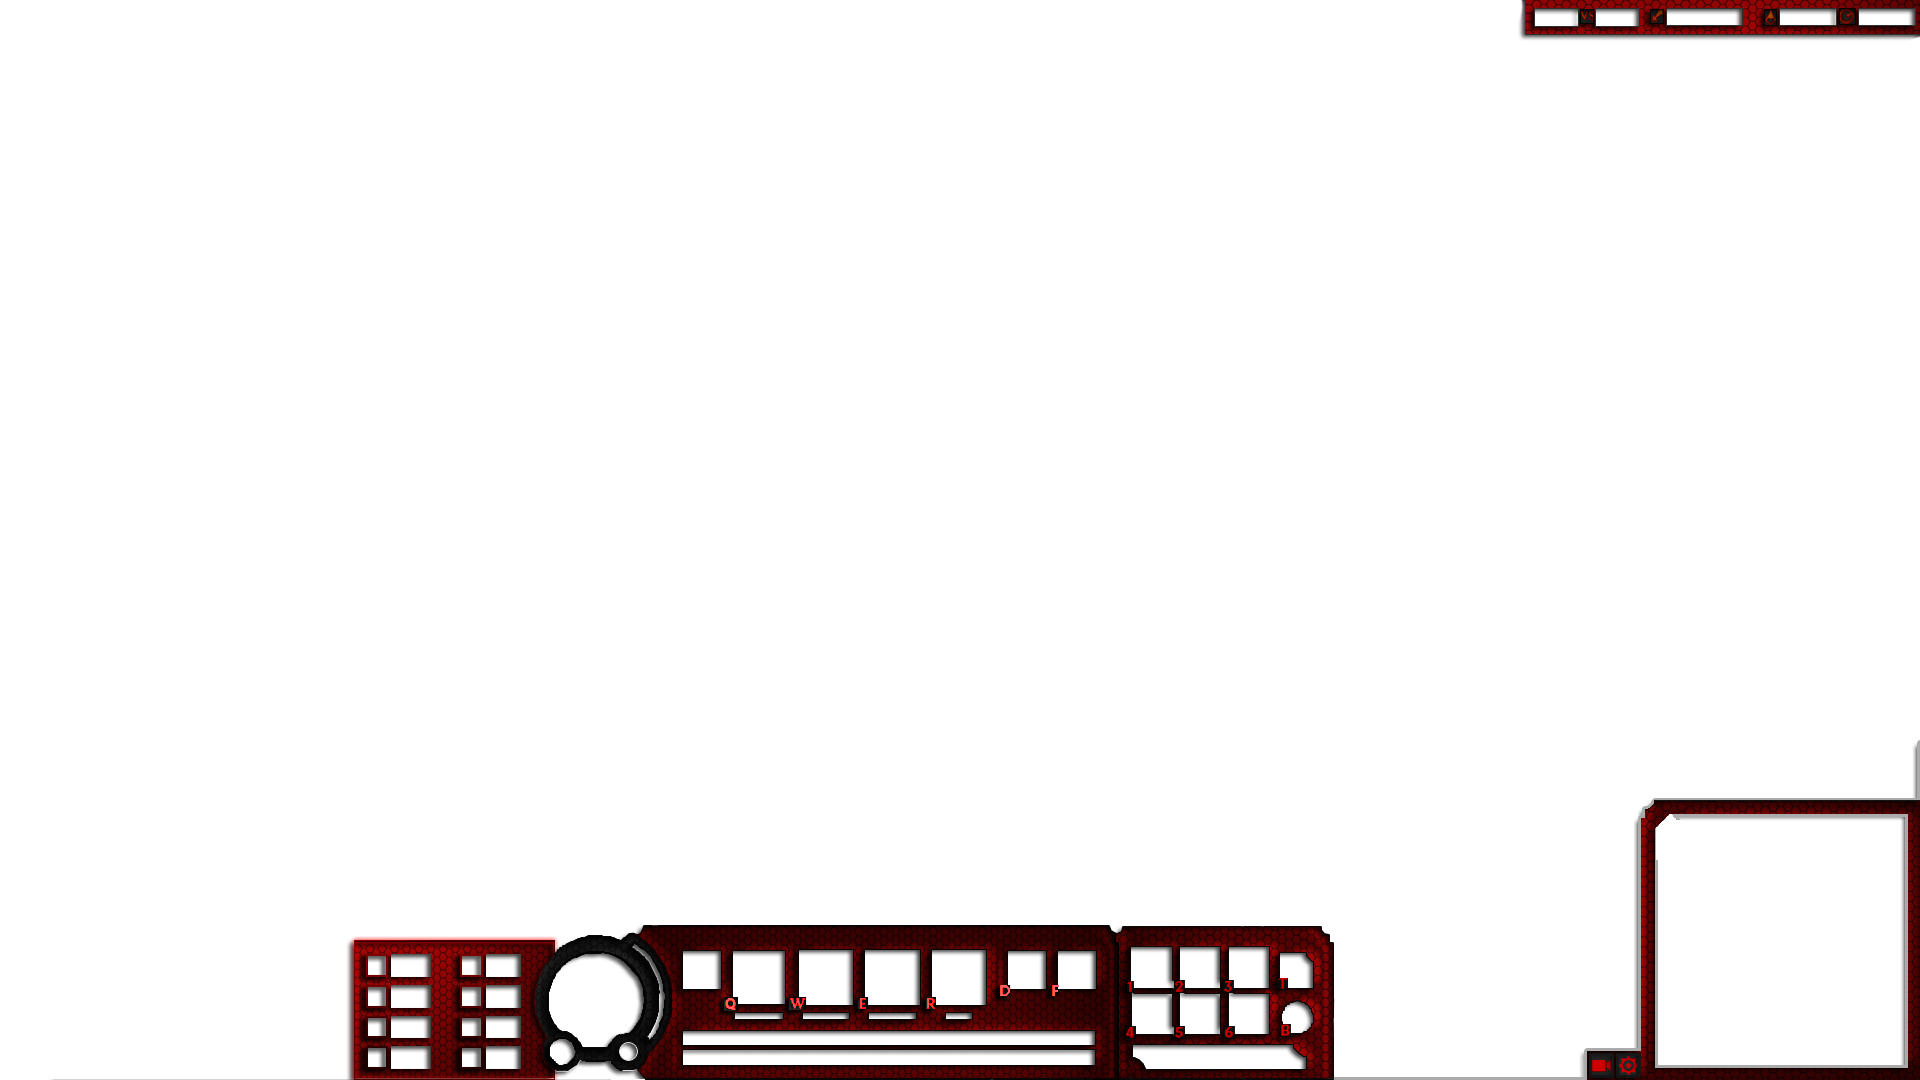 newest_overlay_for_league_of_legends__red_by_etrious08 d9zk1lx